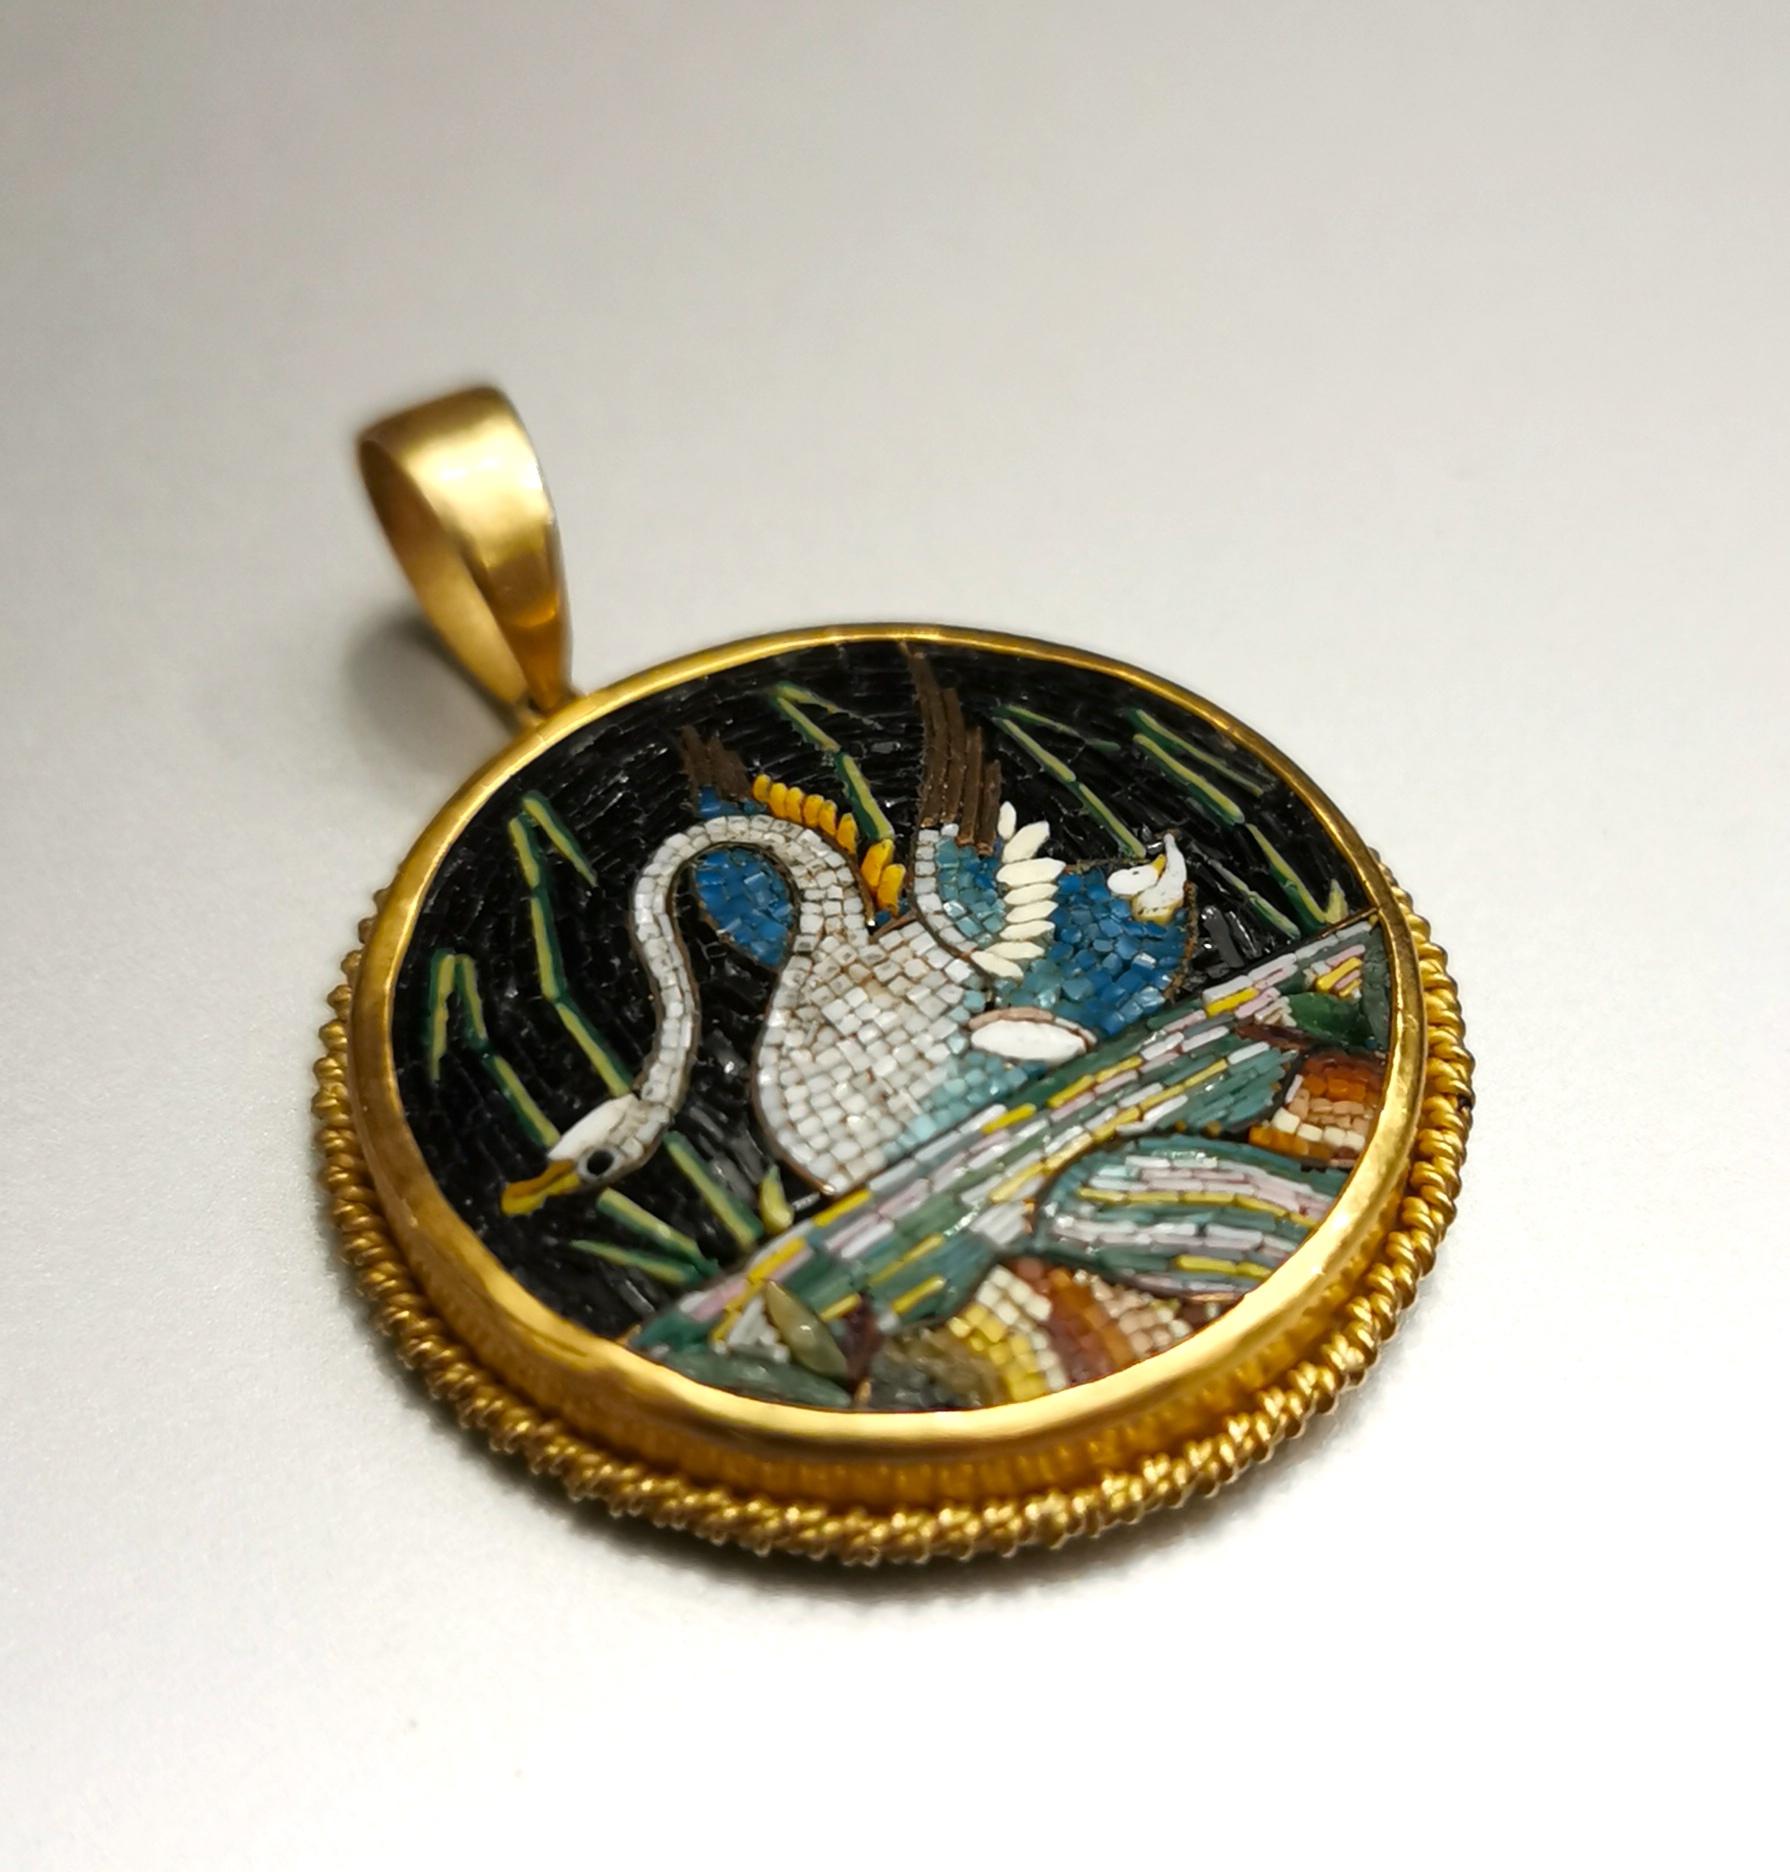 Etruscan Revival Micro mosaic Swan Yellow Gold 22k Pendant.
19th Century. Italian work.

Size: 1.18 inch (3.00 centimeters).

Former collection of a French Lady.
